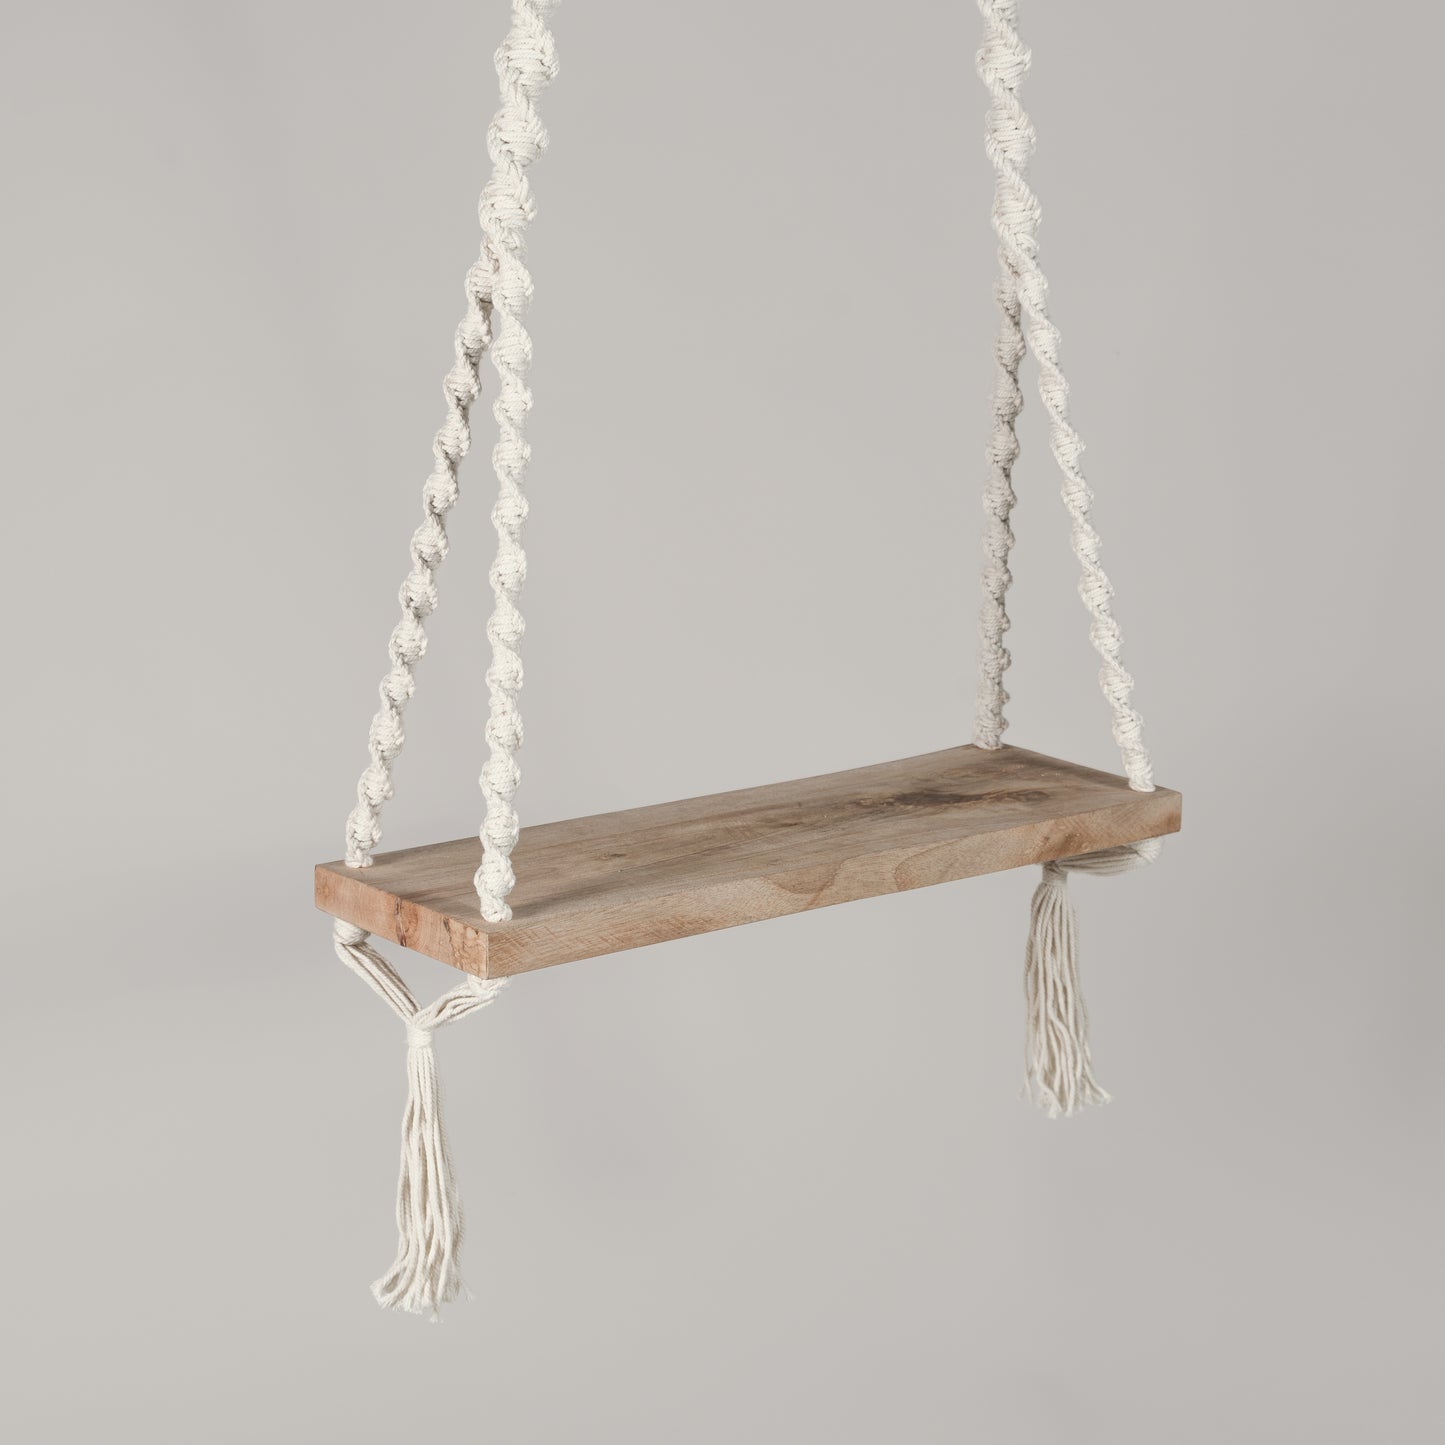 Handmade cotton swing with wooden seat